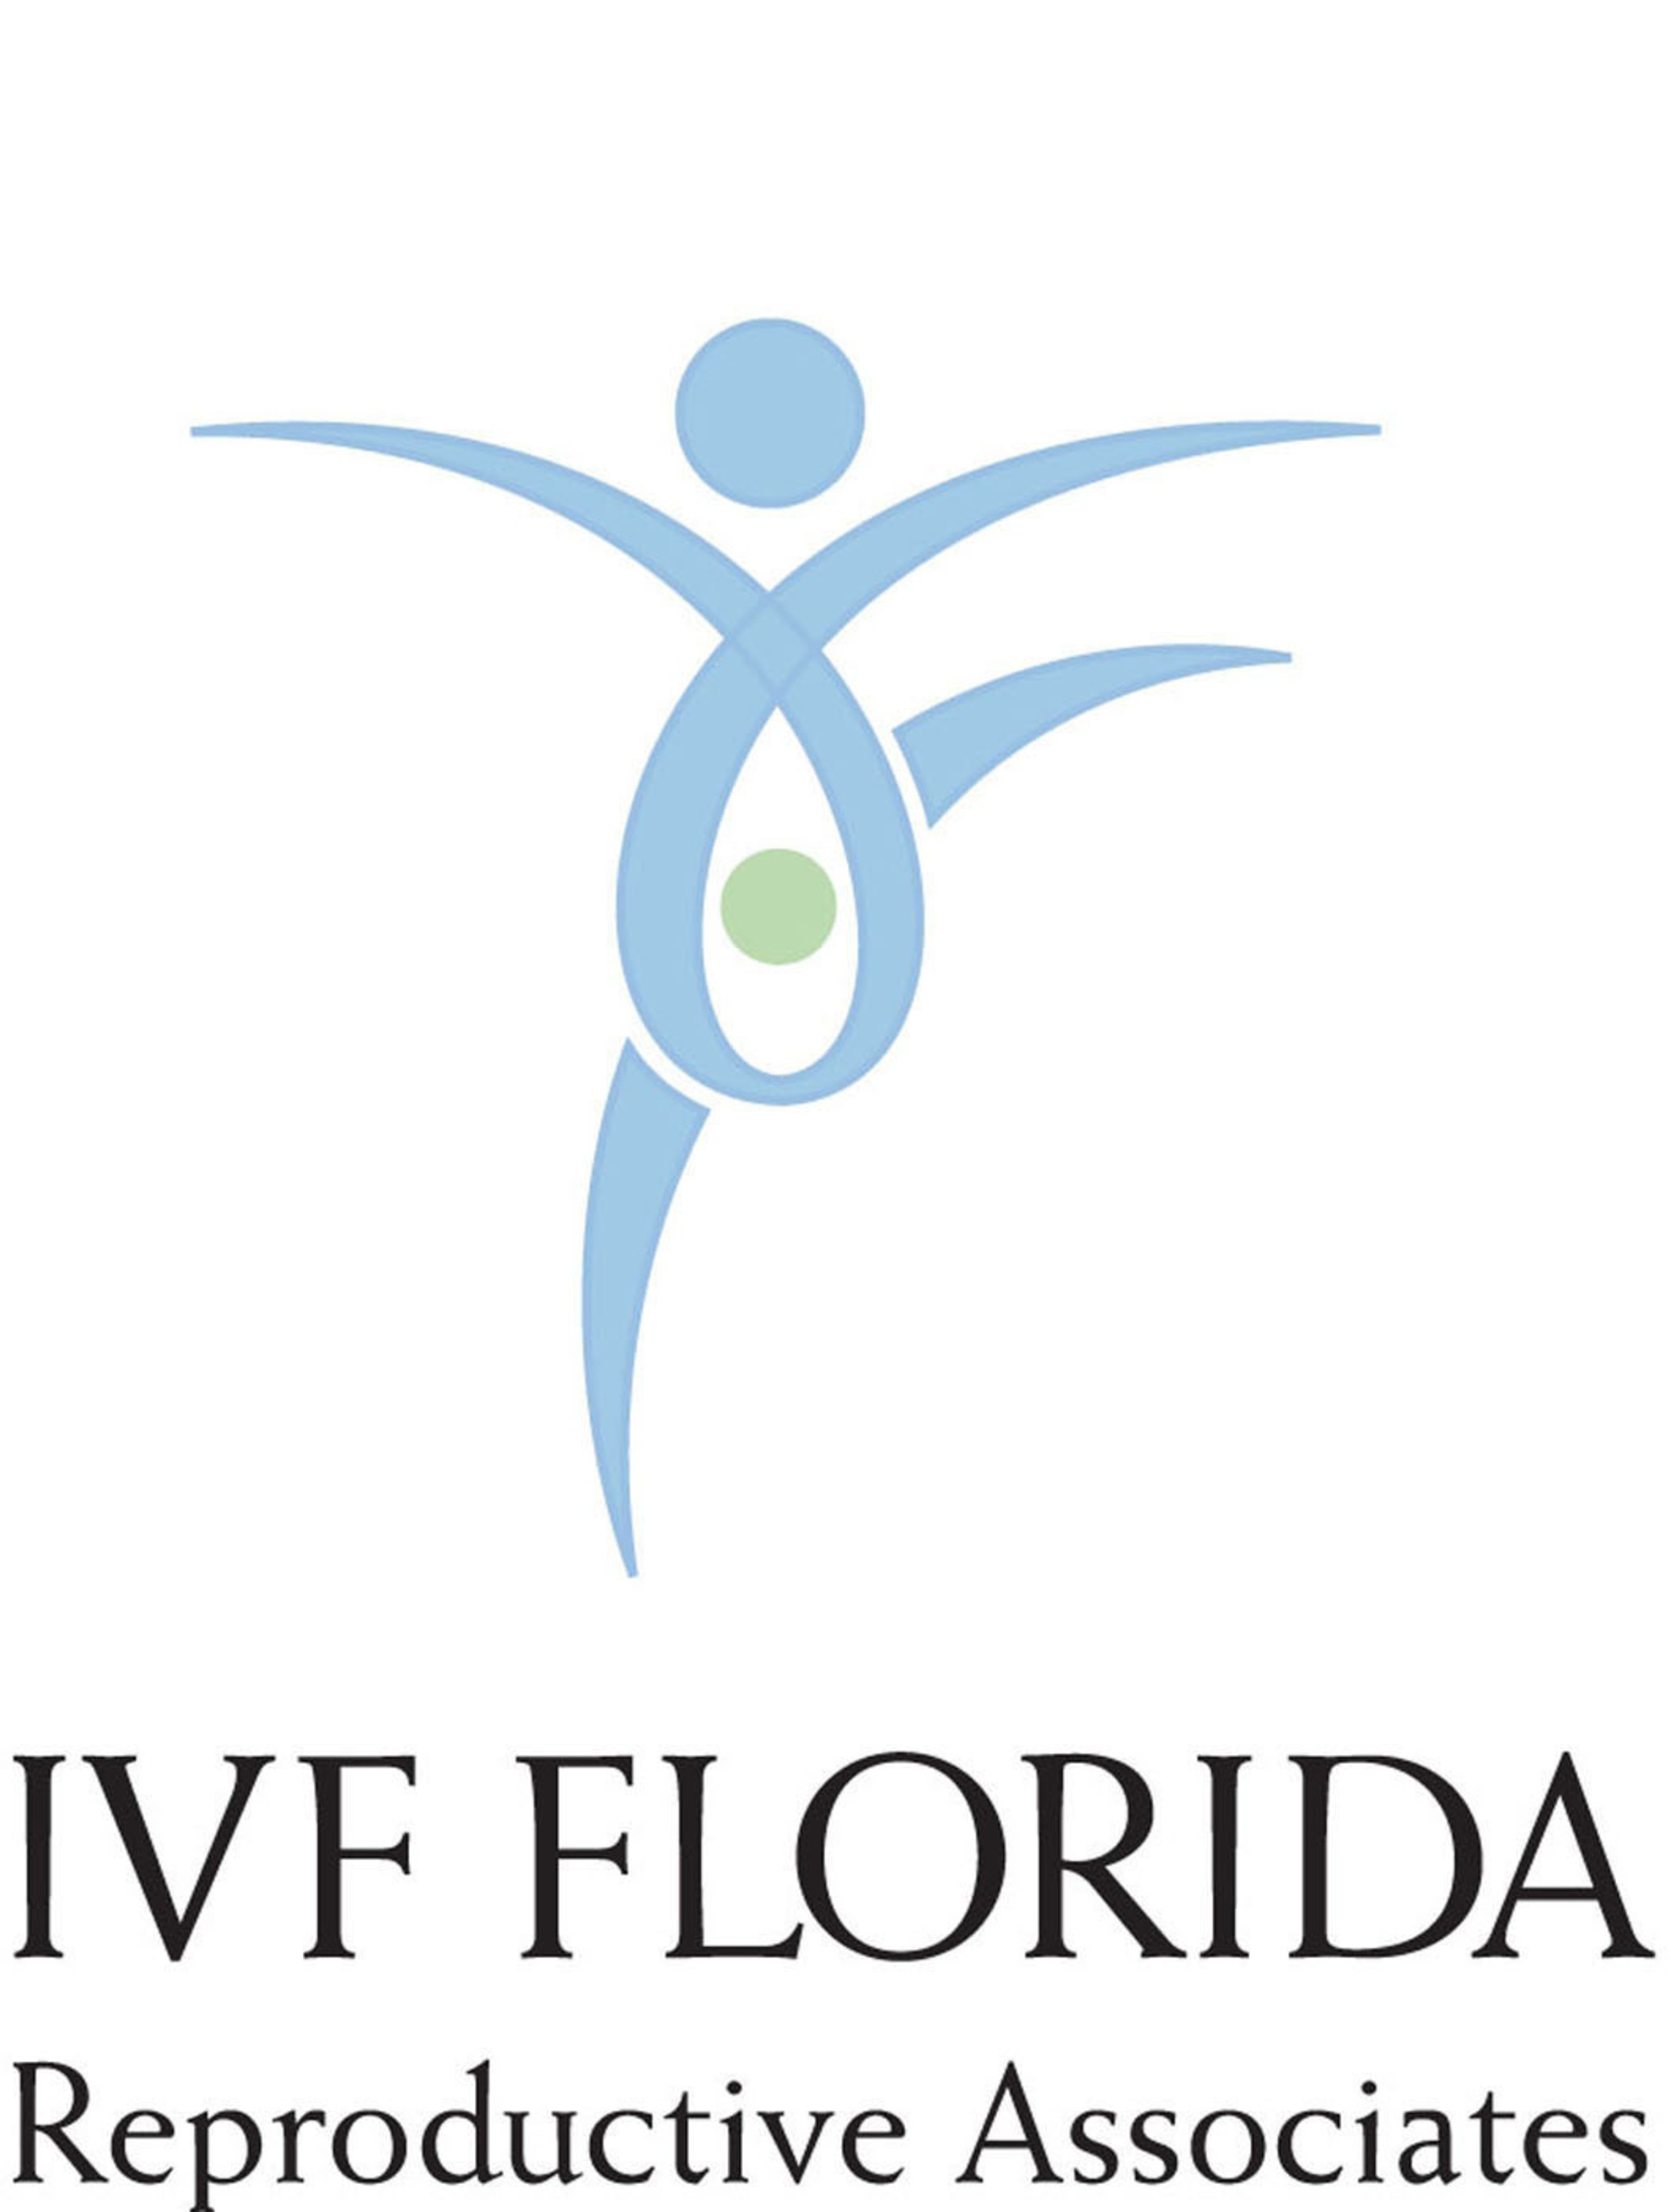 IVF FLORIDA provides individualized compassionate care from low cost fertility treatments to highly complex fertility solutions. (PRNewsFoto/IVF FLORIDA Reproductive Associates) (PRNewsFoto/)